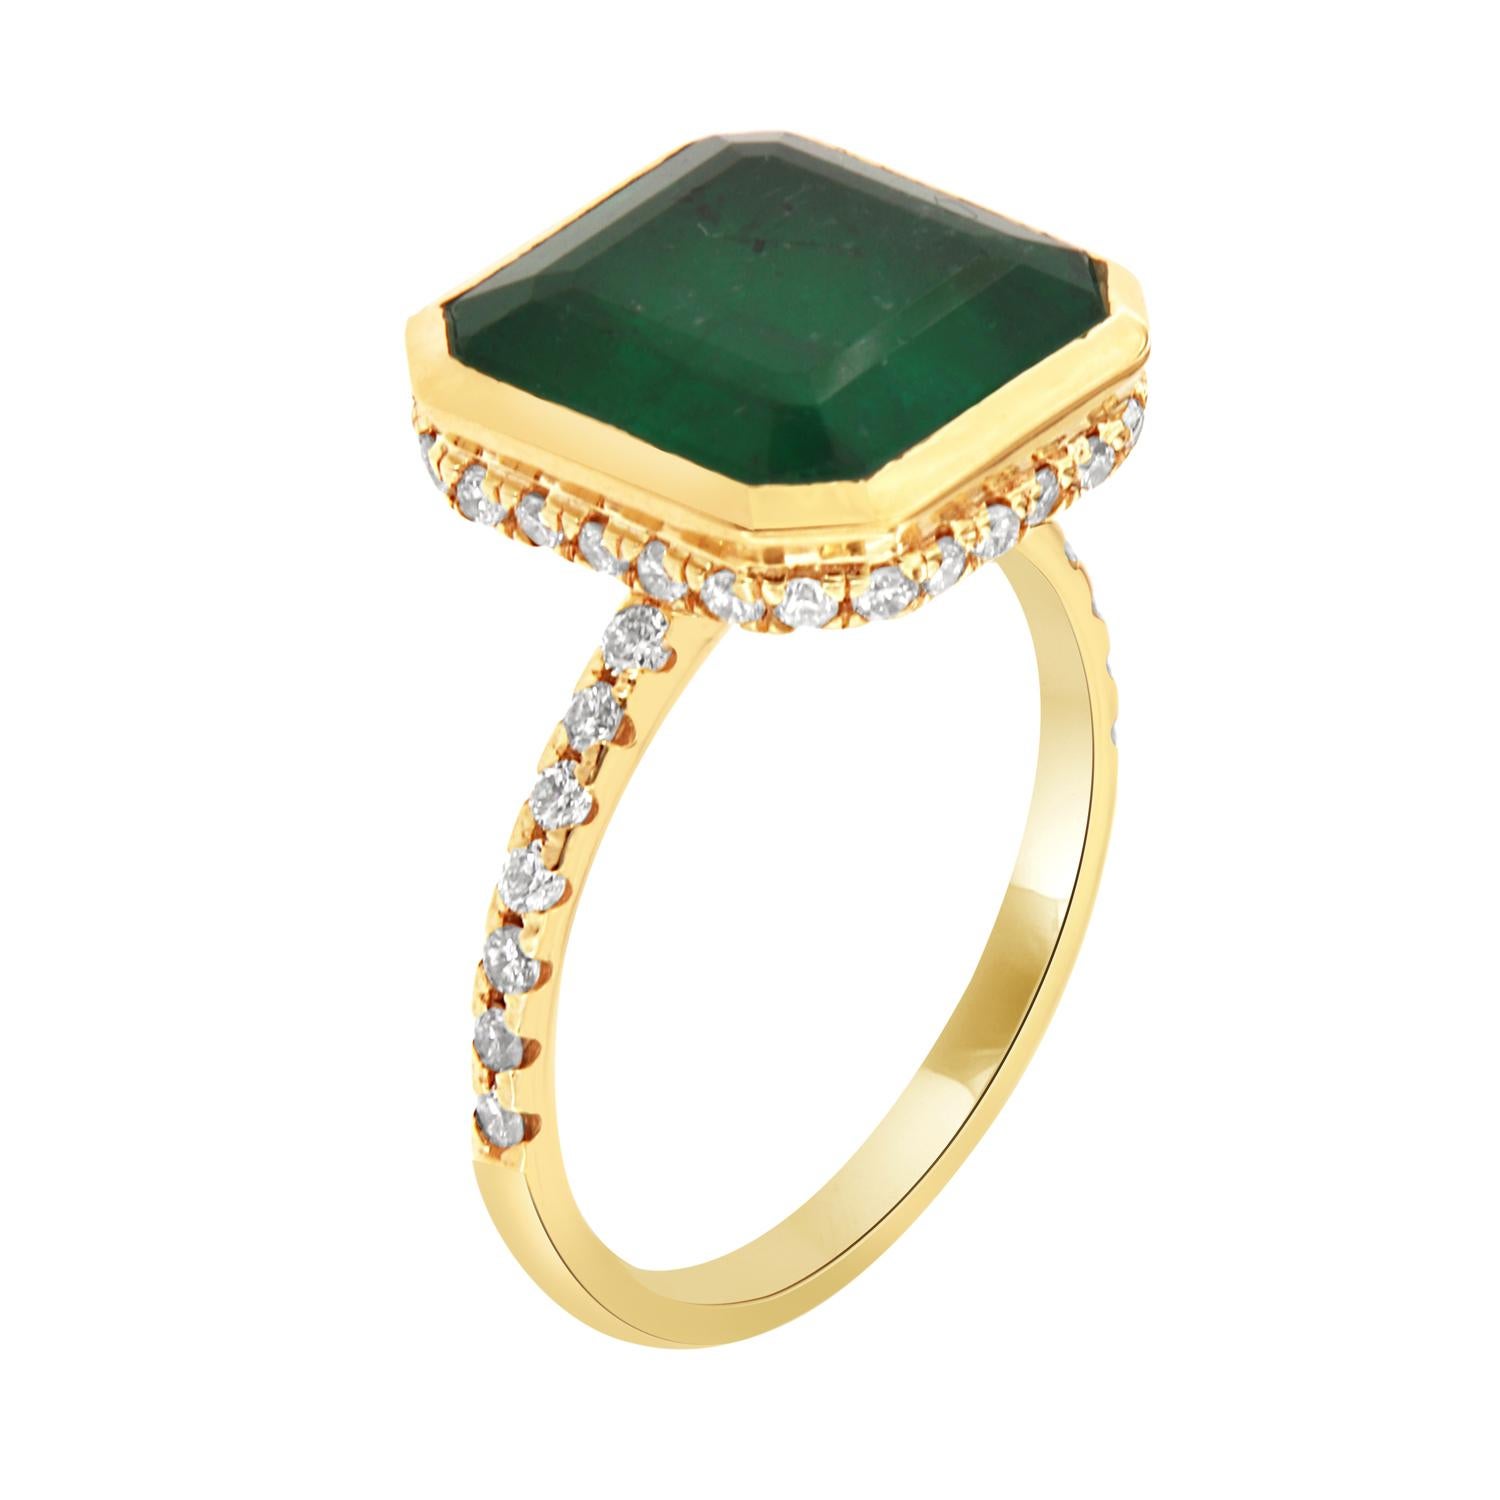 This beautiful ring features a GIA-certified 6.98 Carat Asscher-shaped Green Emerald bezel set.  A hidden halo of brilliant round diamonds encircled the crown. A delicate row of diamonds is a Micro-Prong set on top of a 1.8 mm wide band. 
The